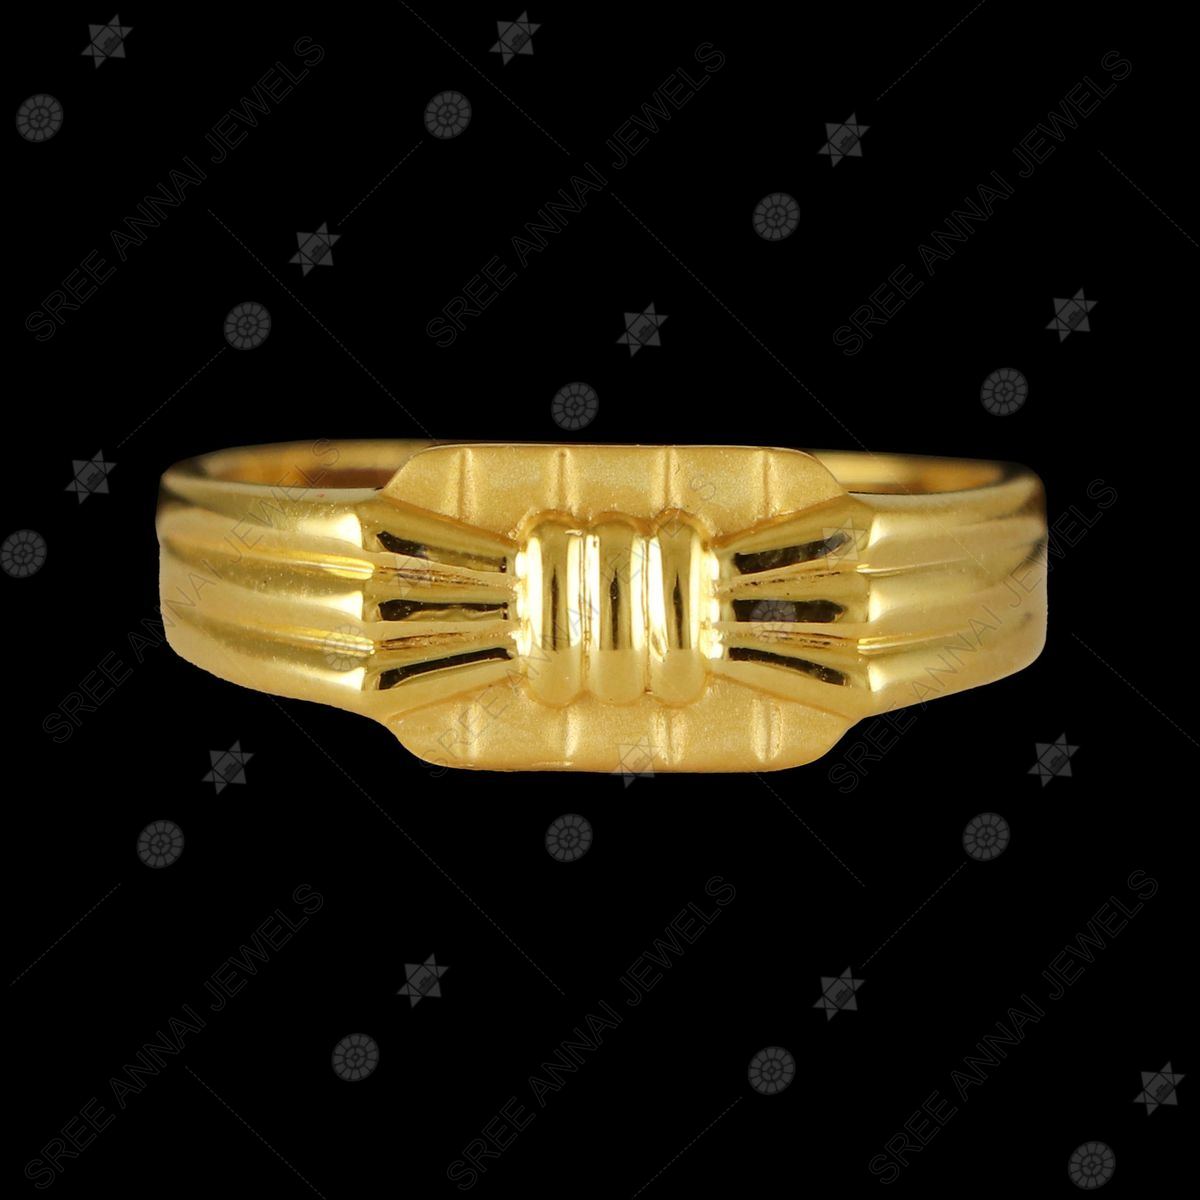 Buy quality 916 gold casting & rodium Gents ring in Ahmedabad